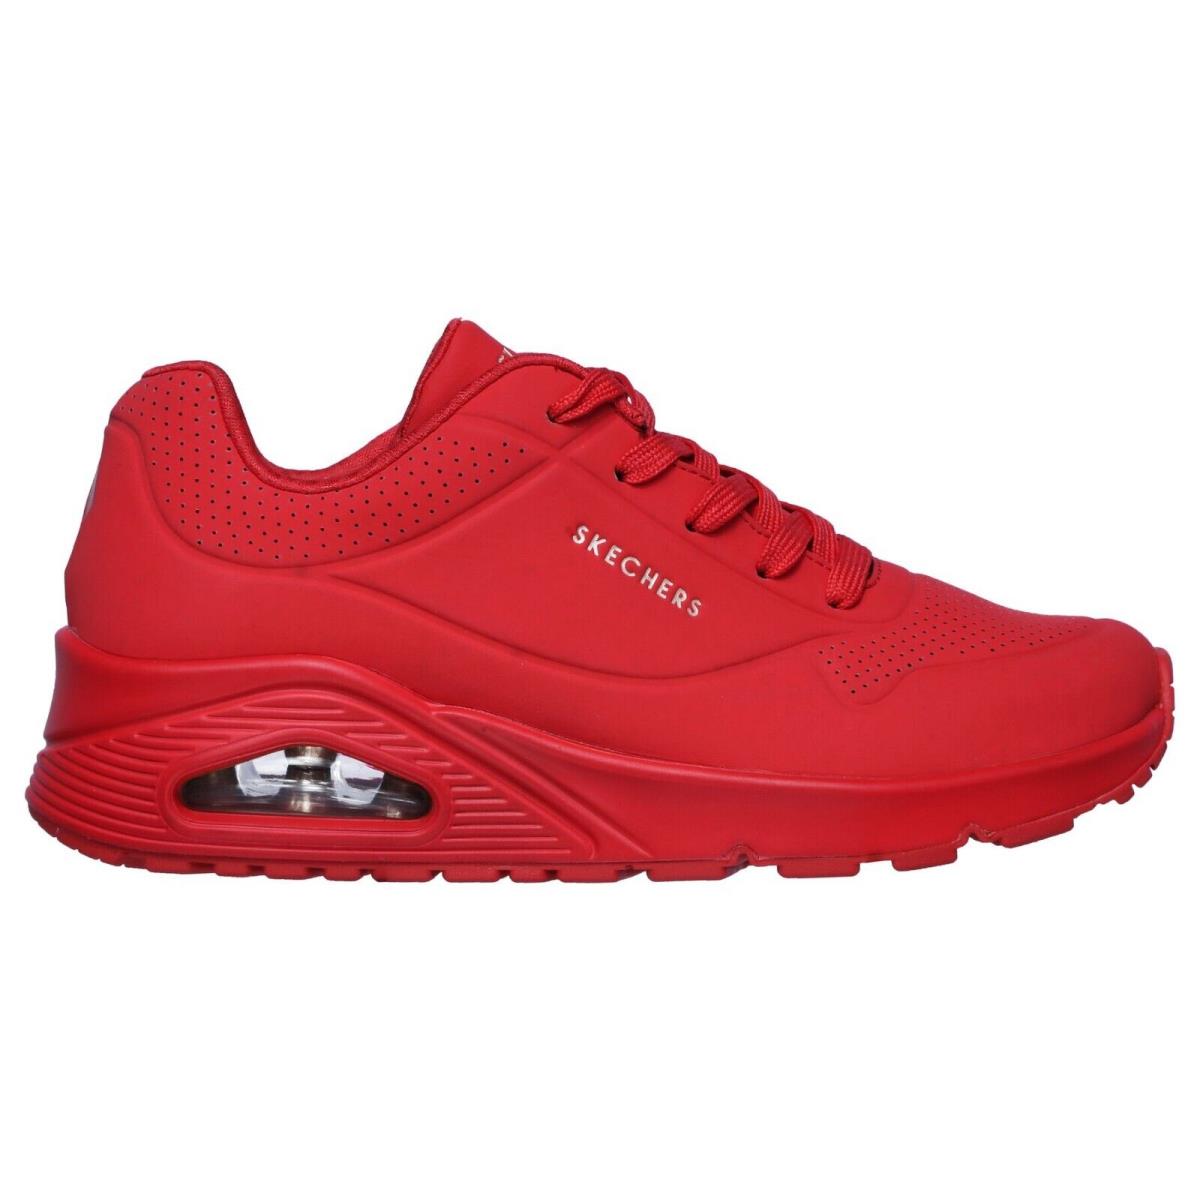 Skechers shoes  - Red 4